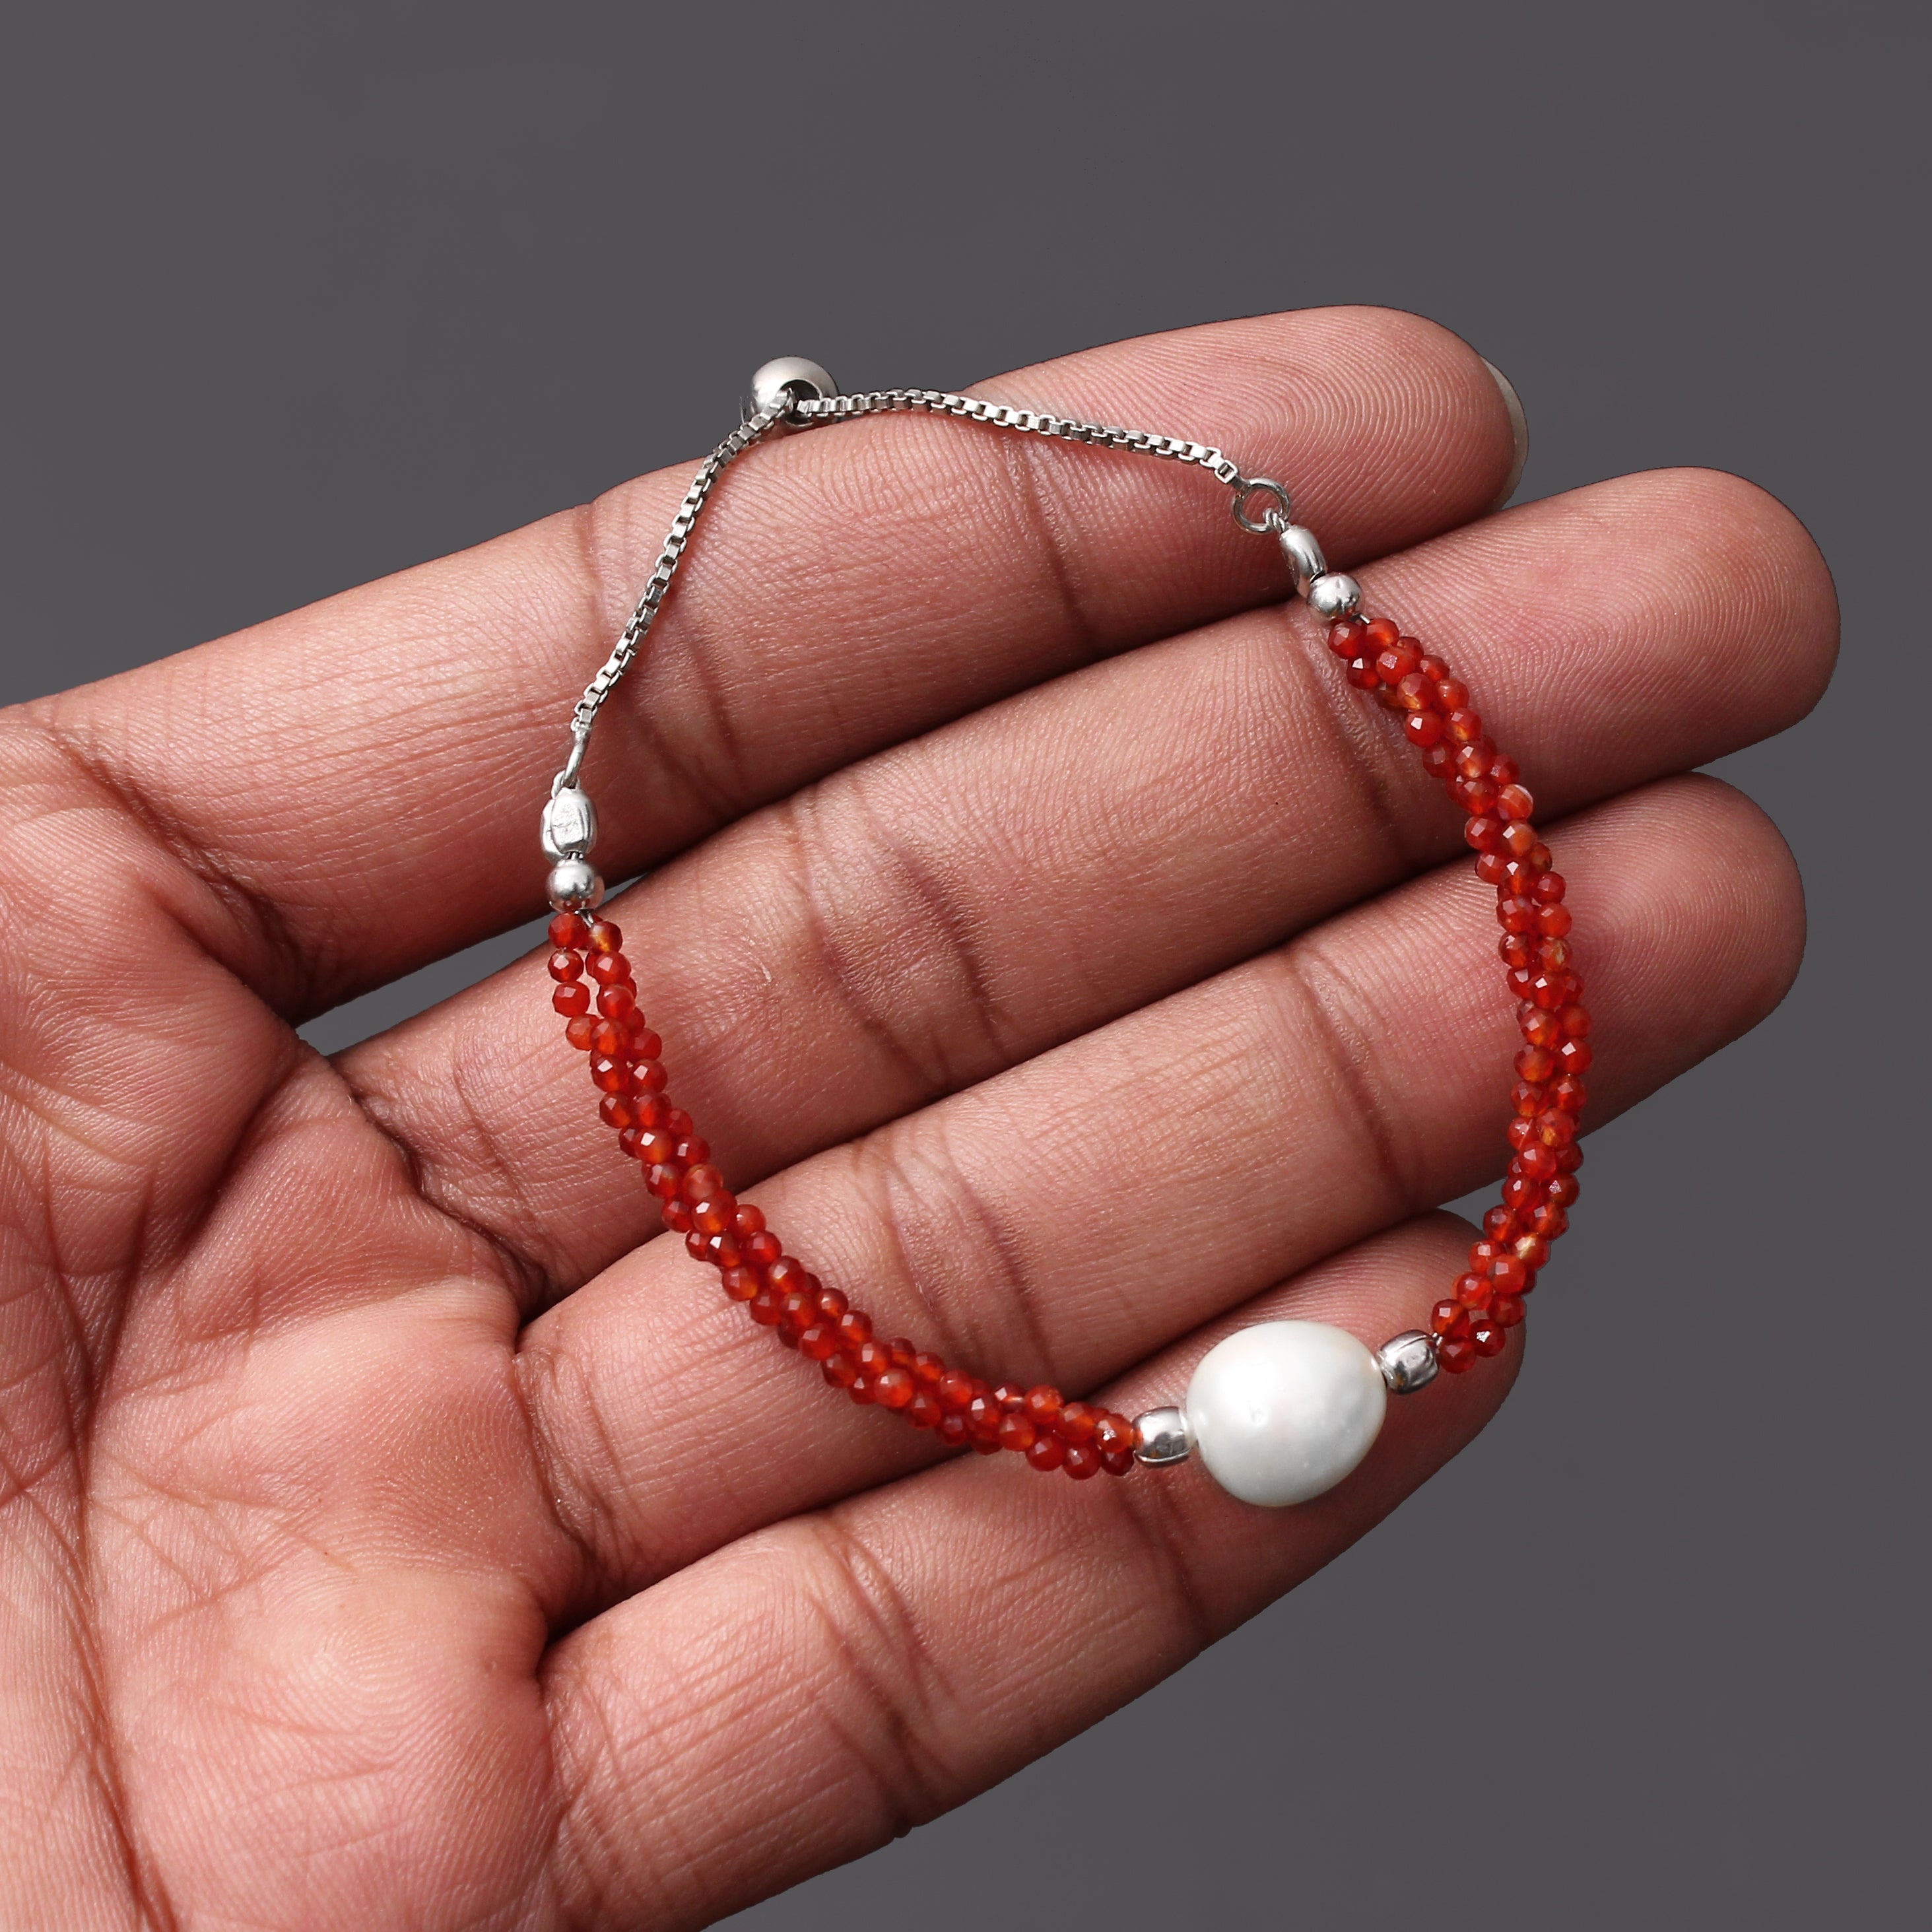 UNICEF Market | Handcrafted Carnelian and Sterling Silver Bangle Bracelet -  Passionately